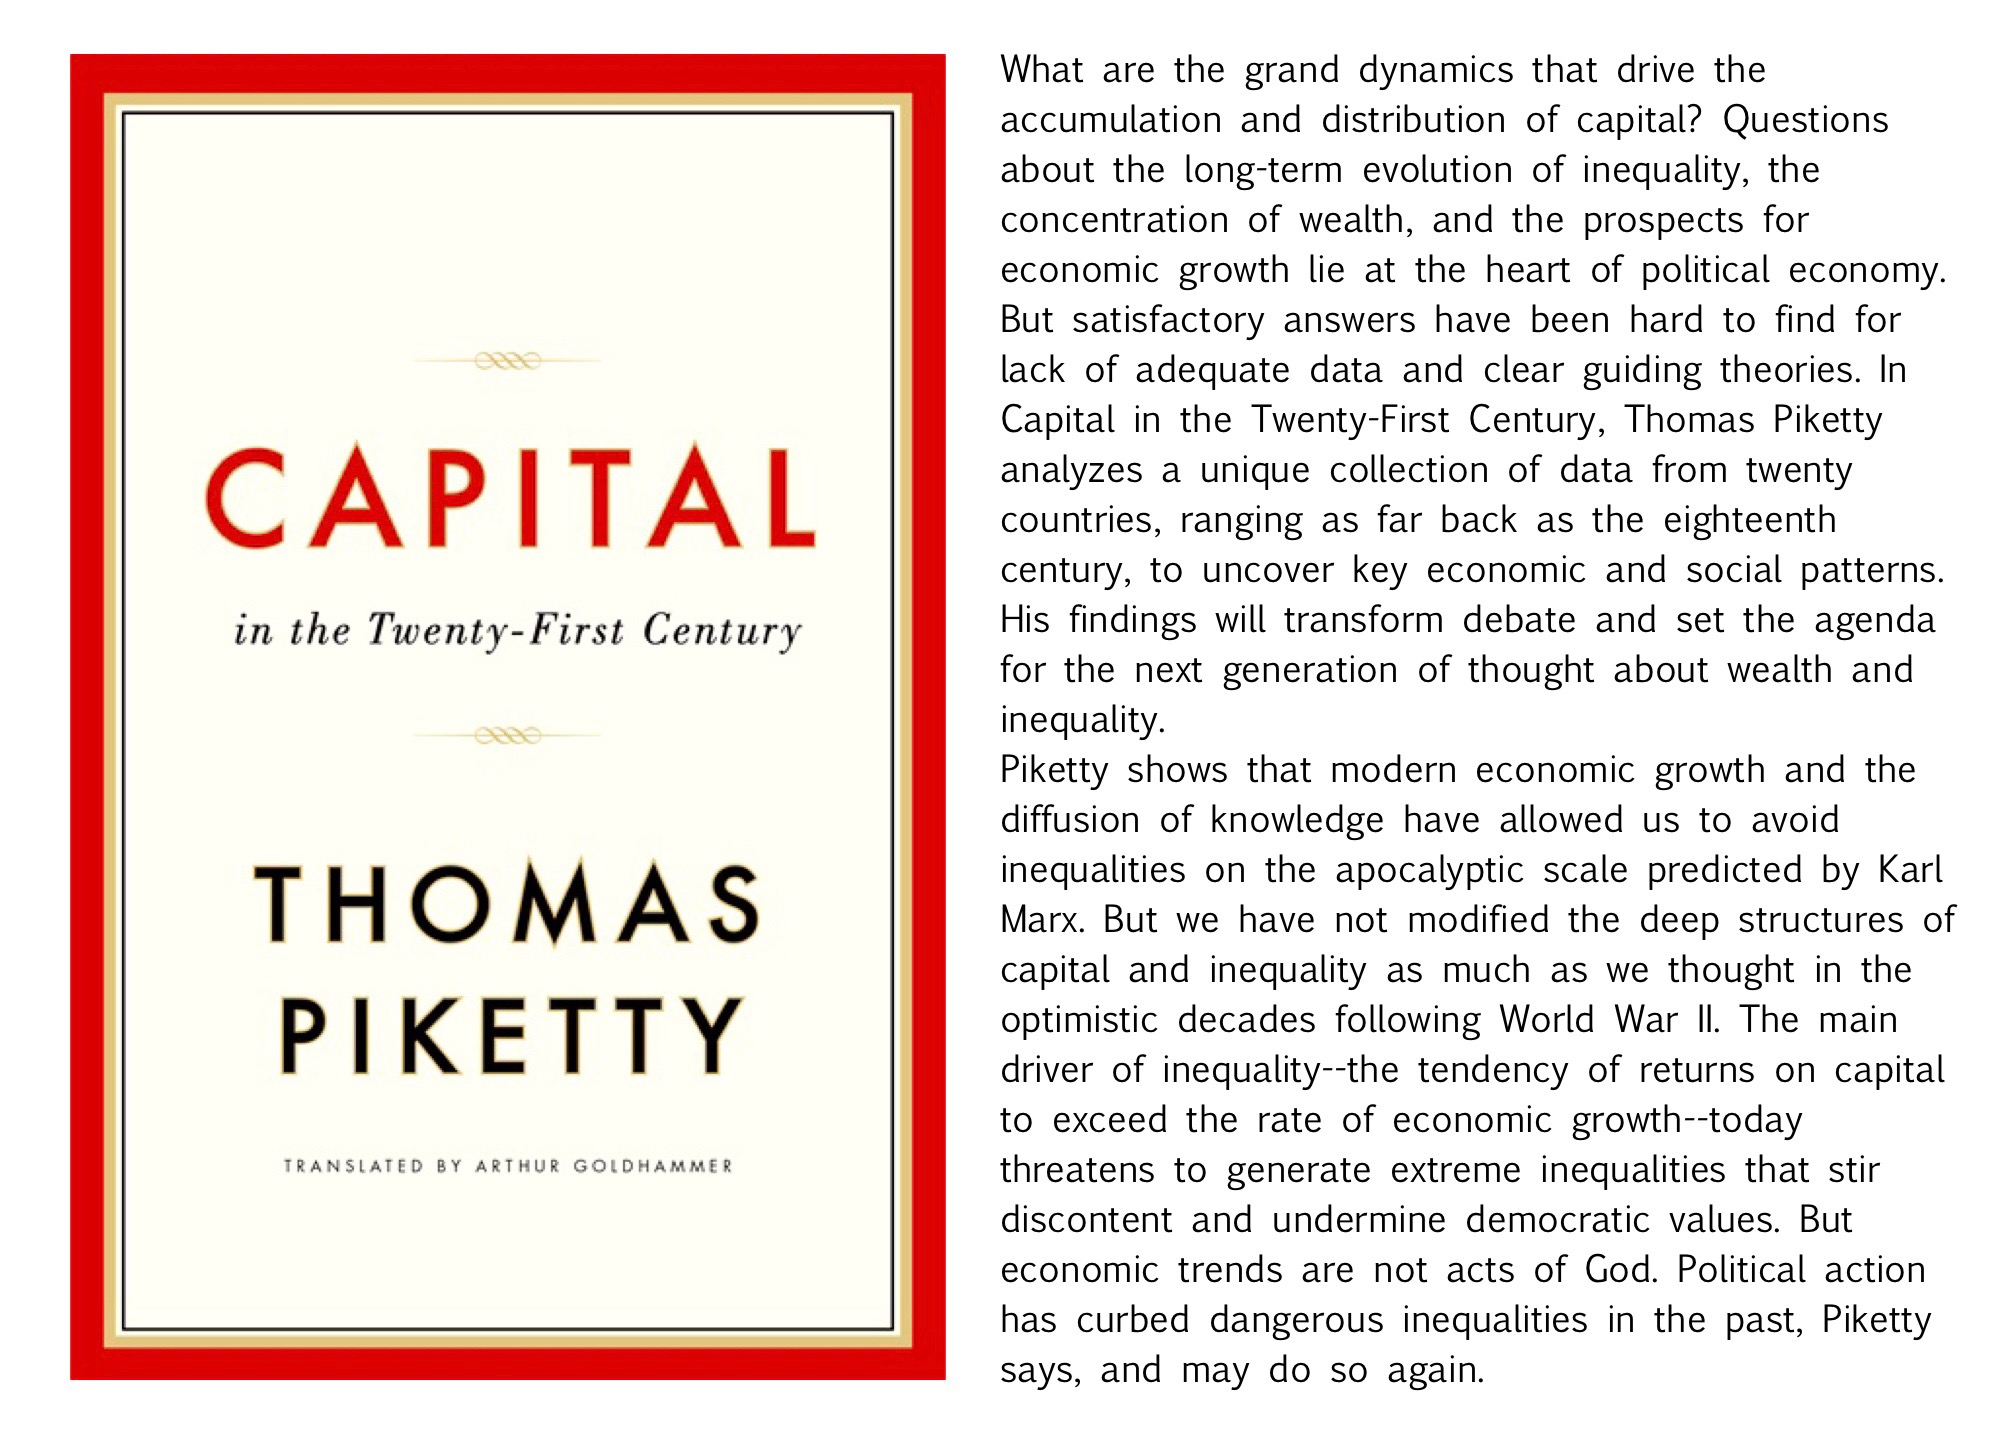 about capital in the twenty first century